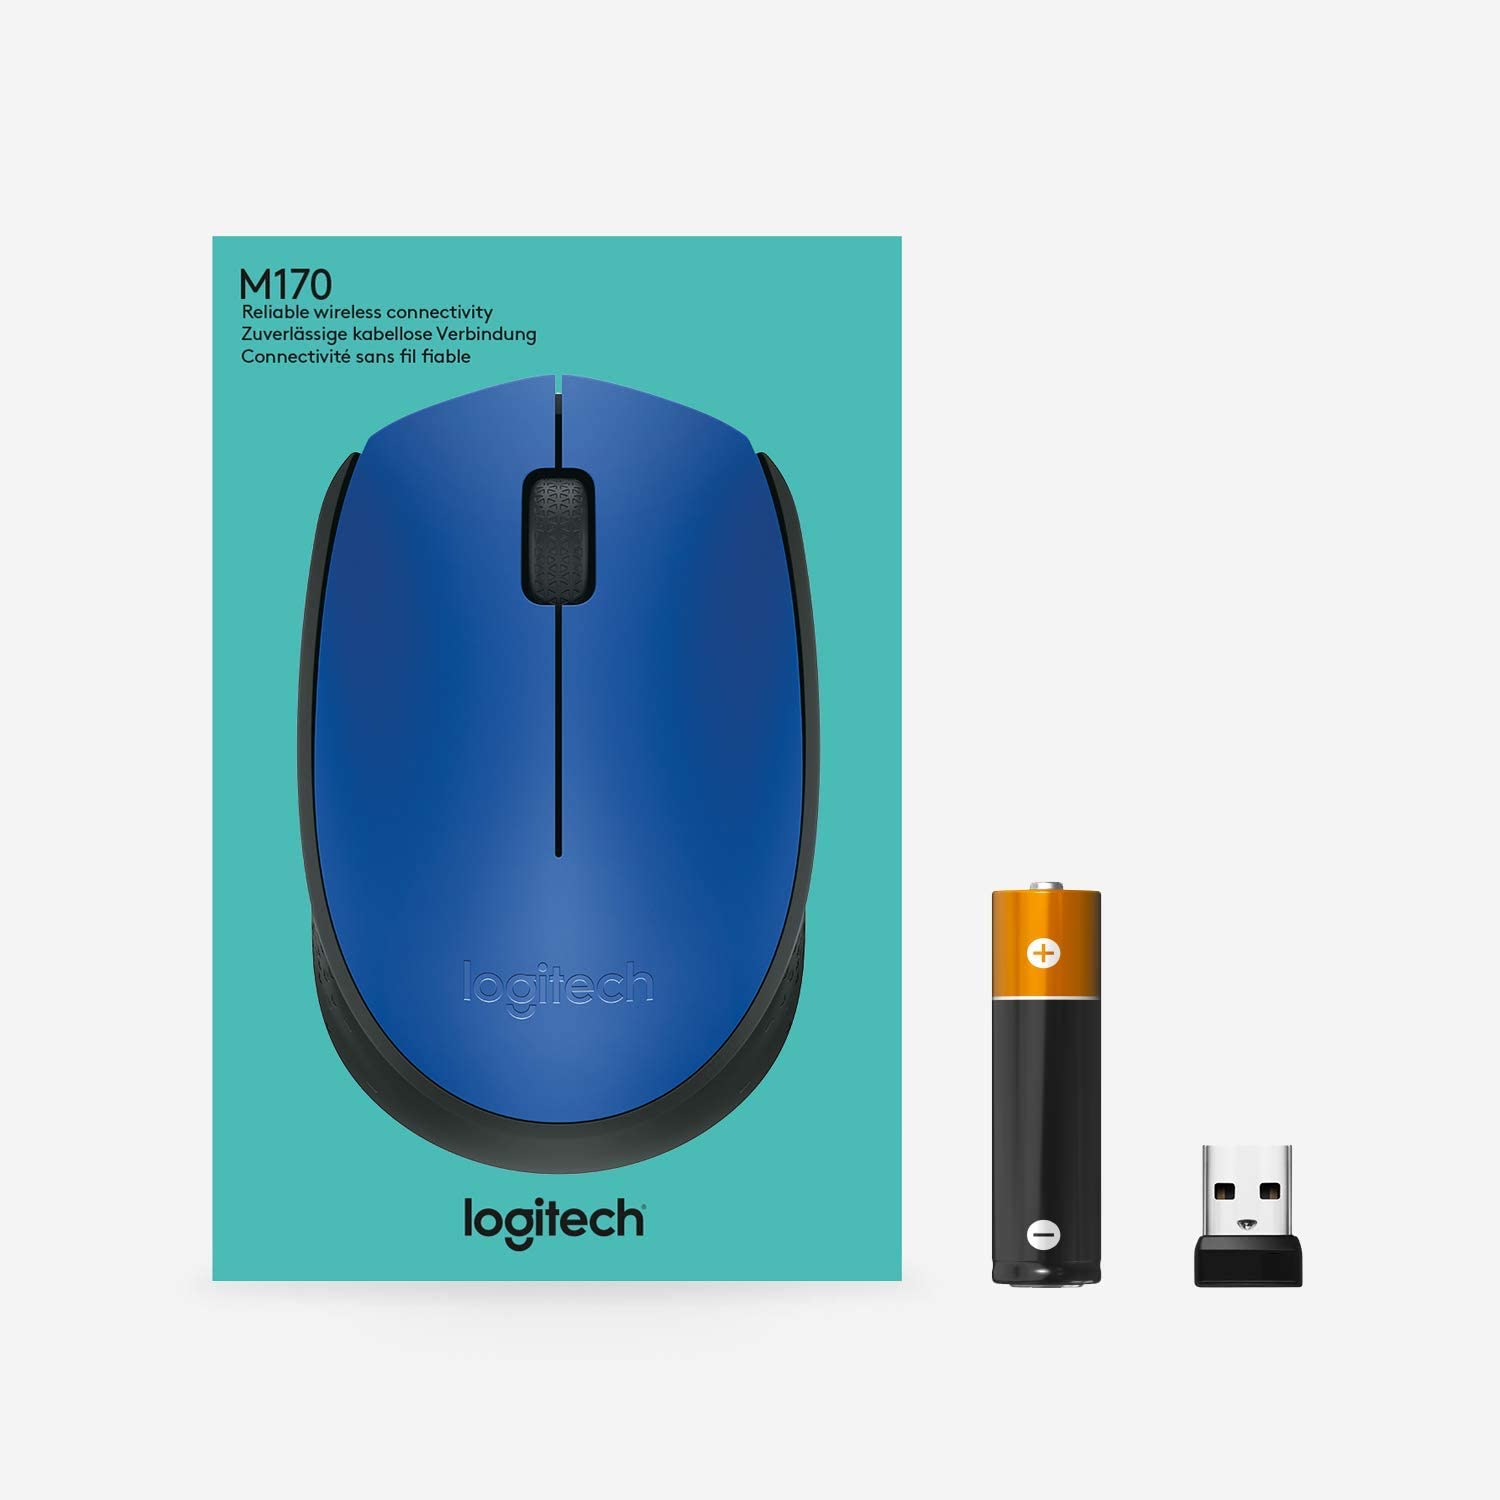 Logitech M170 Wireless Mouse, 2.4 GHz with USB Mini Receiver, Optical Tracking, 12-Months Battery Life, Ambidextrous PC/Mac/Laptop - Blue